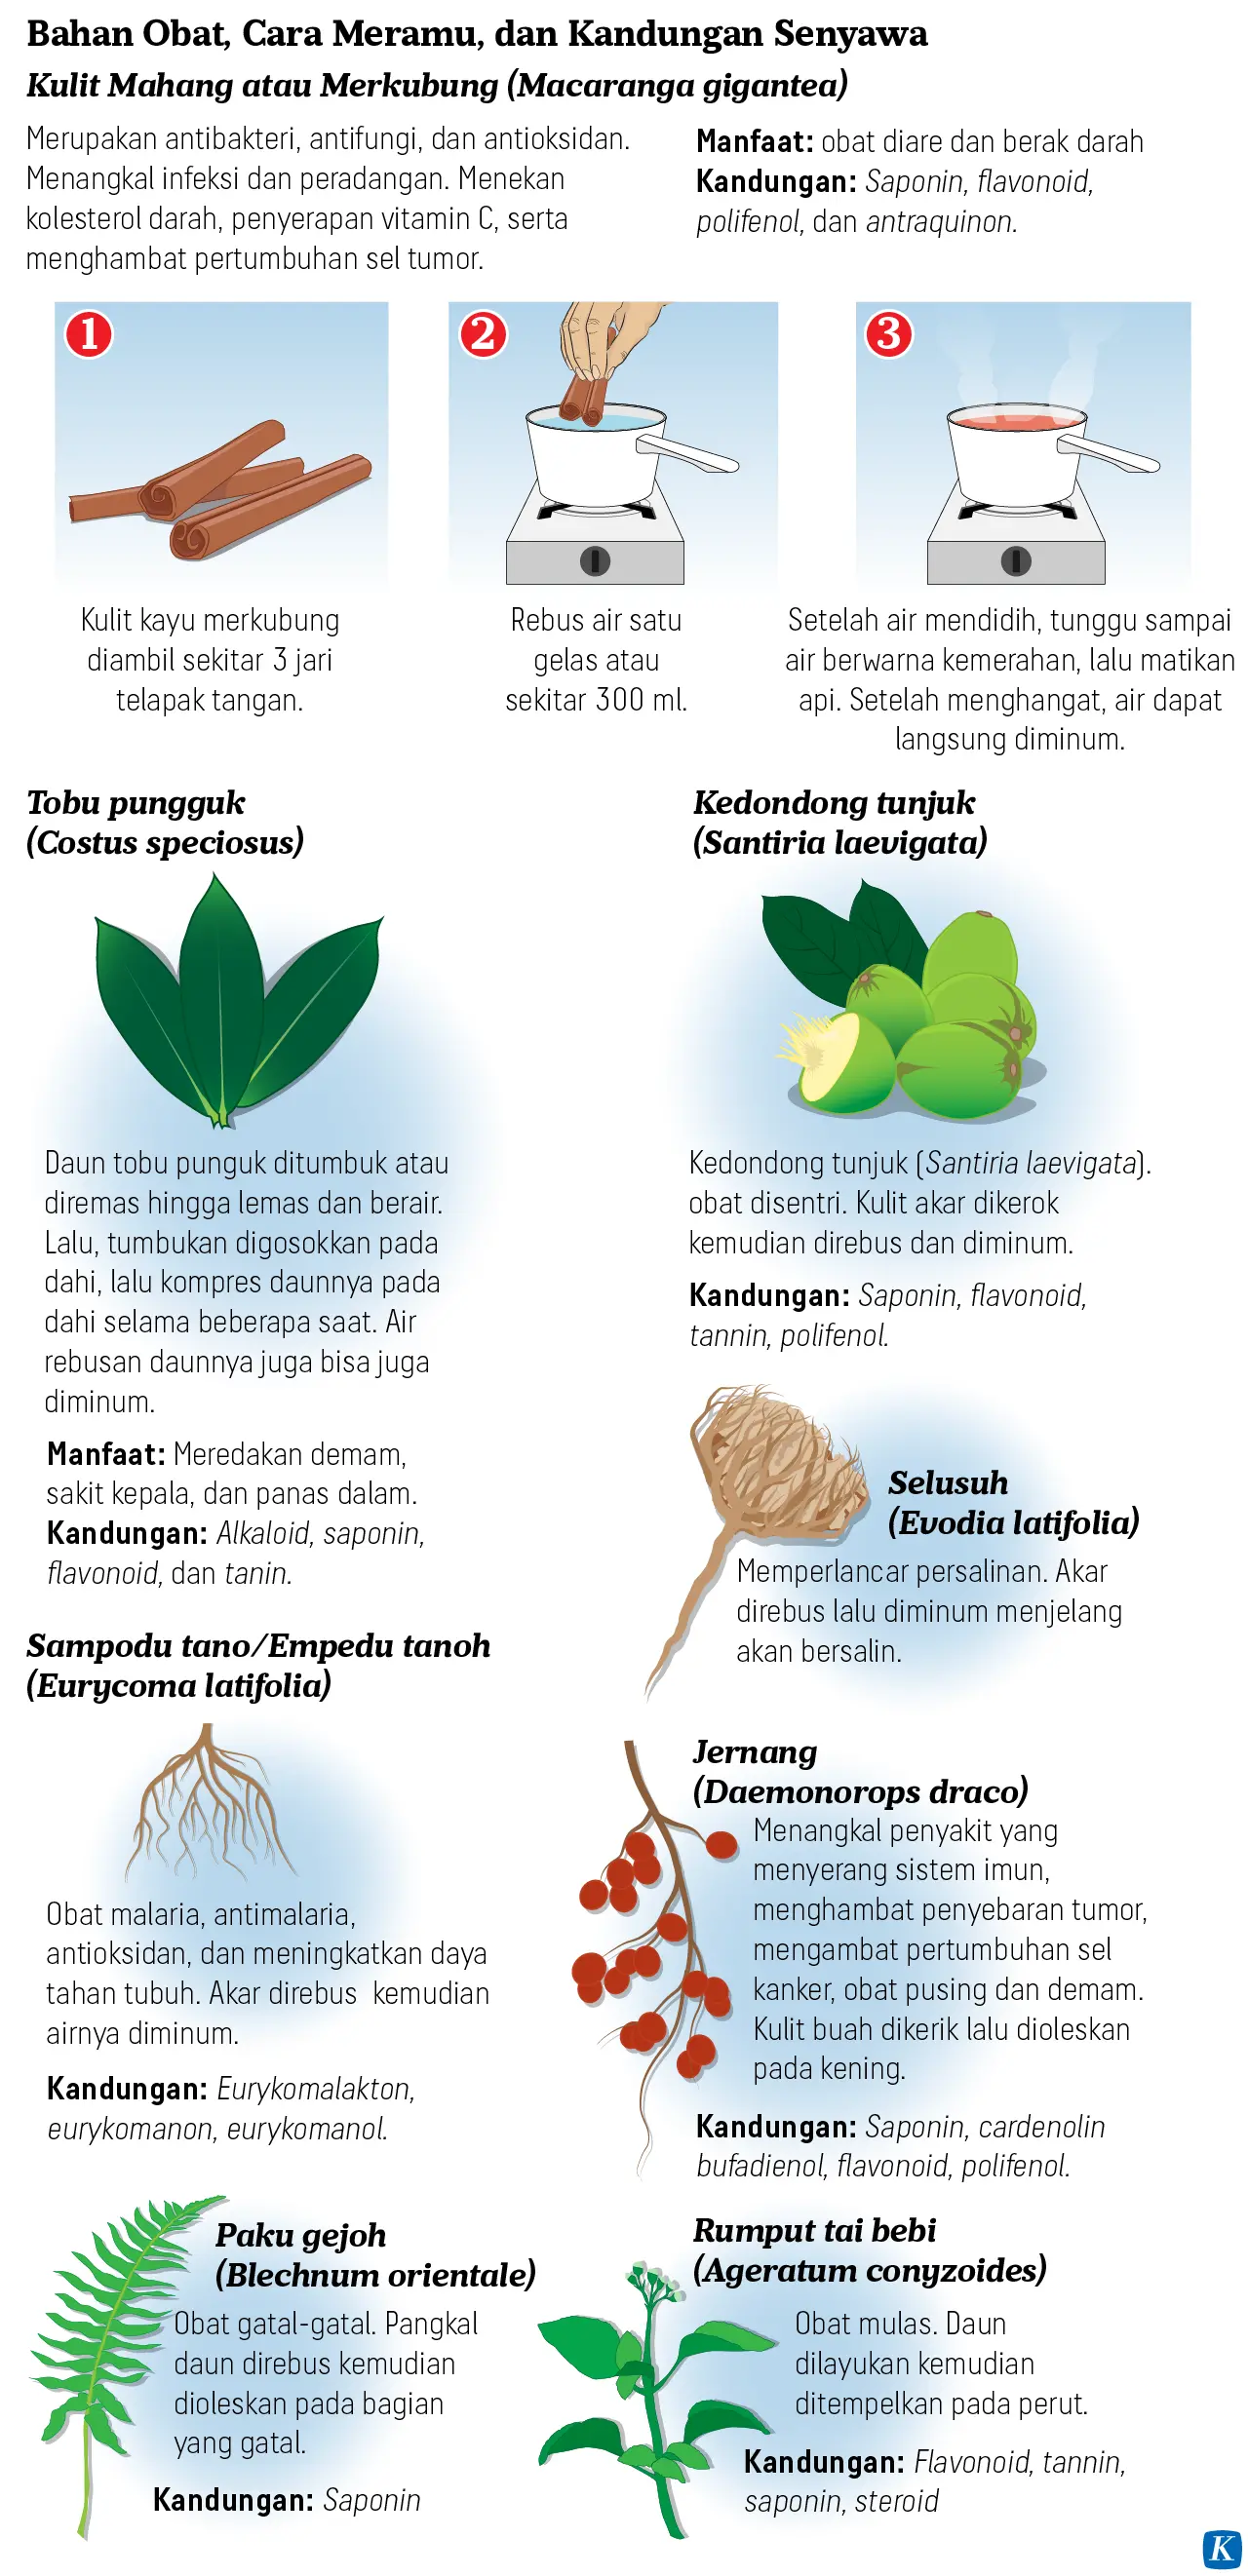 An infographic in bahasa Indonesia language explains a cooking process for what appears to be a tree bark as well as images and descriptions of several medicinal plants. 